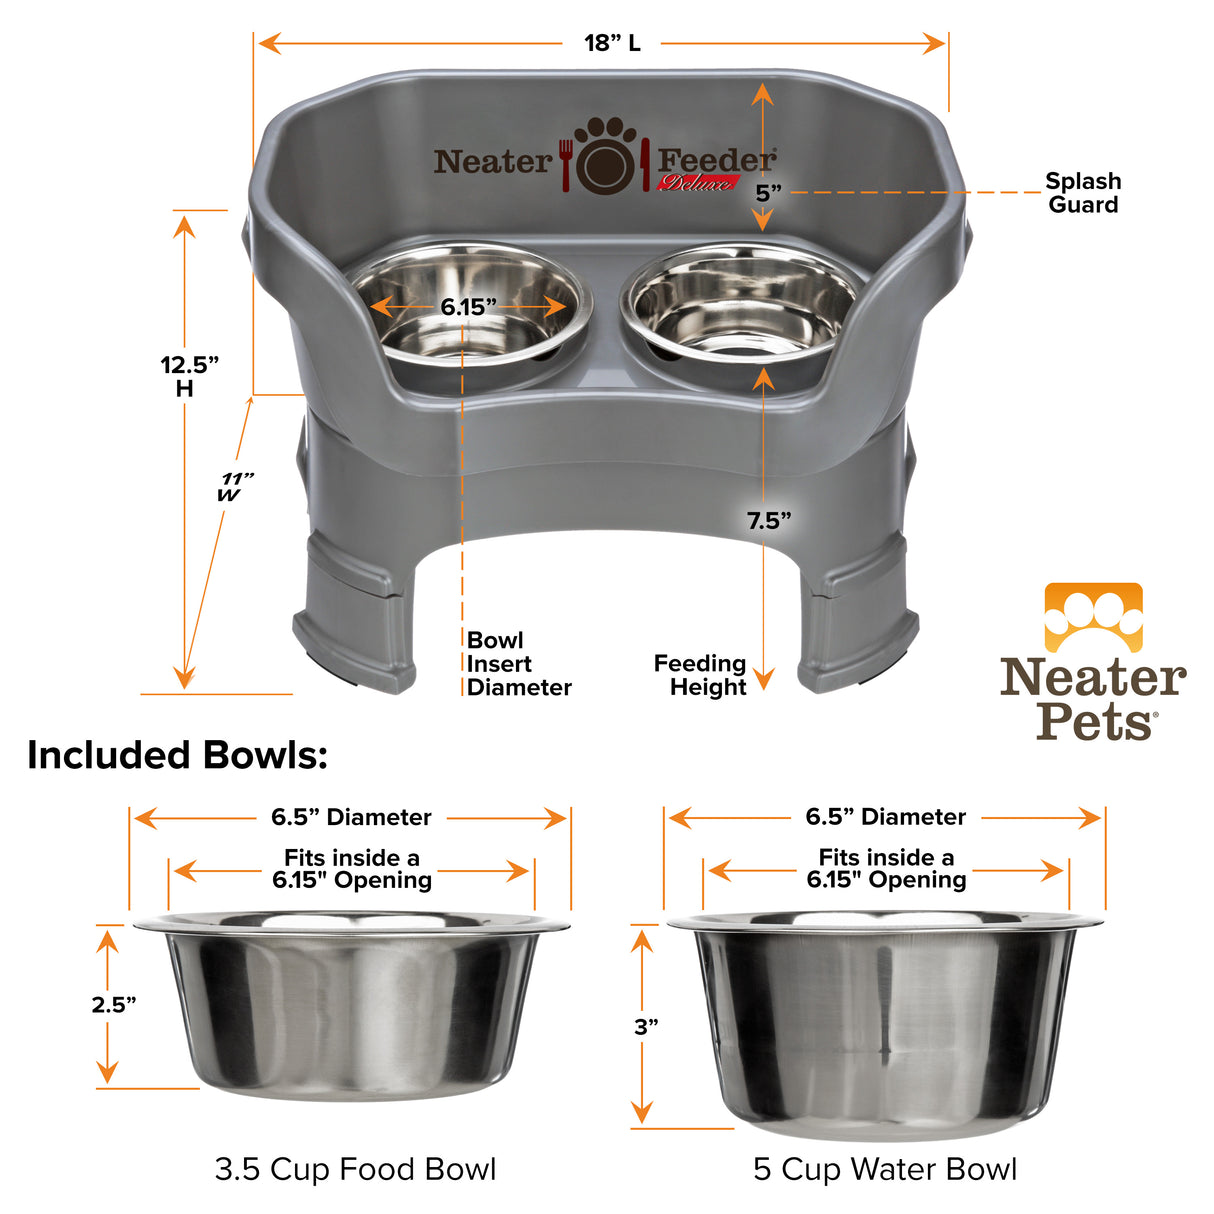 Deluxe Gunmetal Grey Medium Dog Neater Feeder with leg extensions and Bowl dimensions